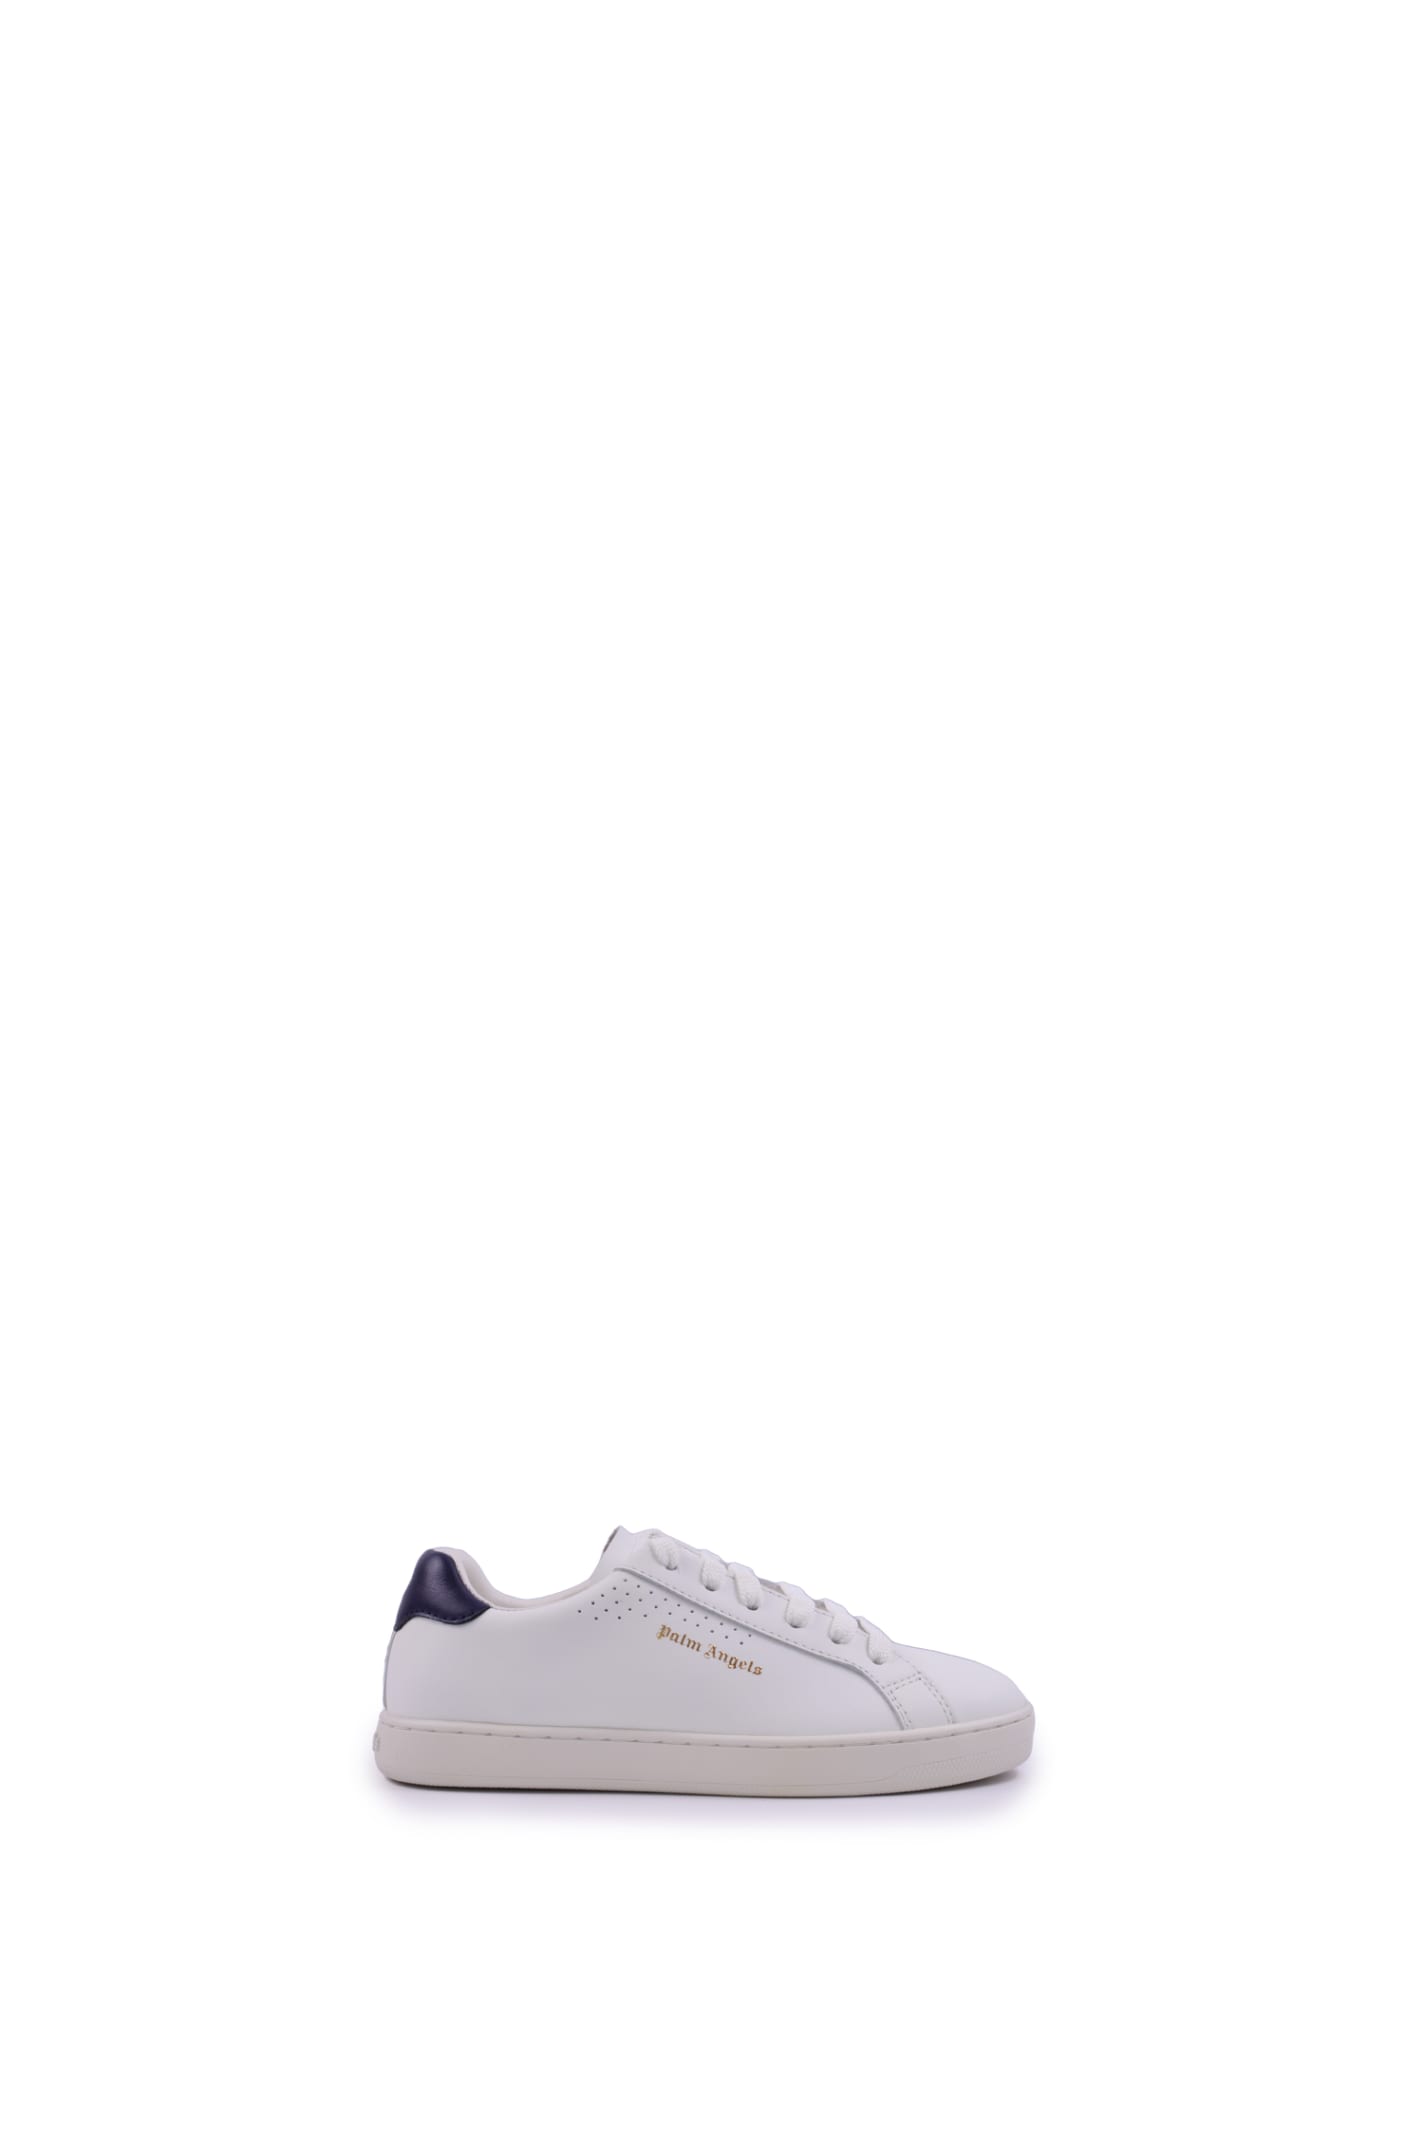 Palm Angels Leather Sneakers